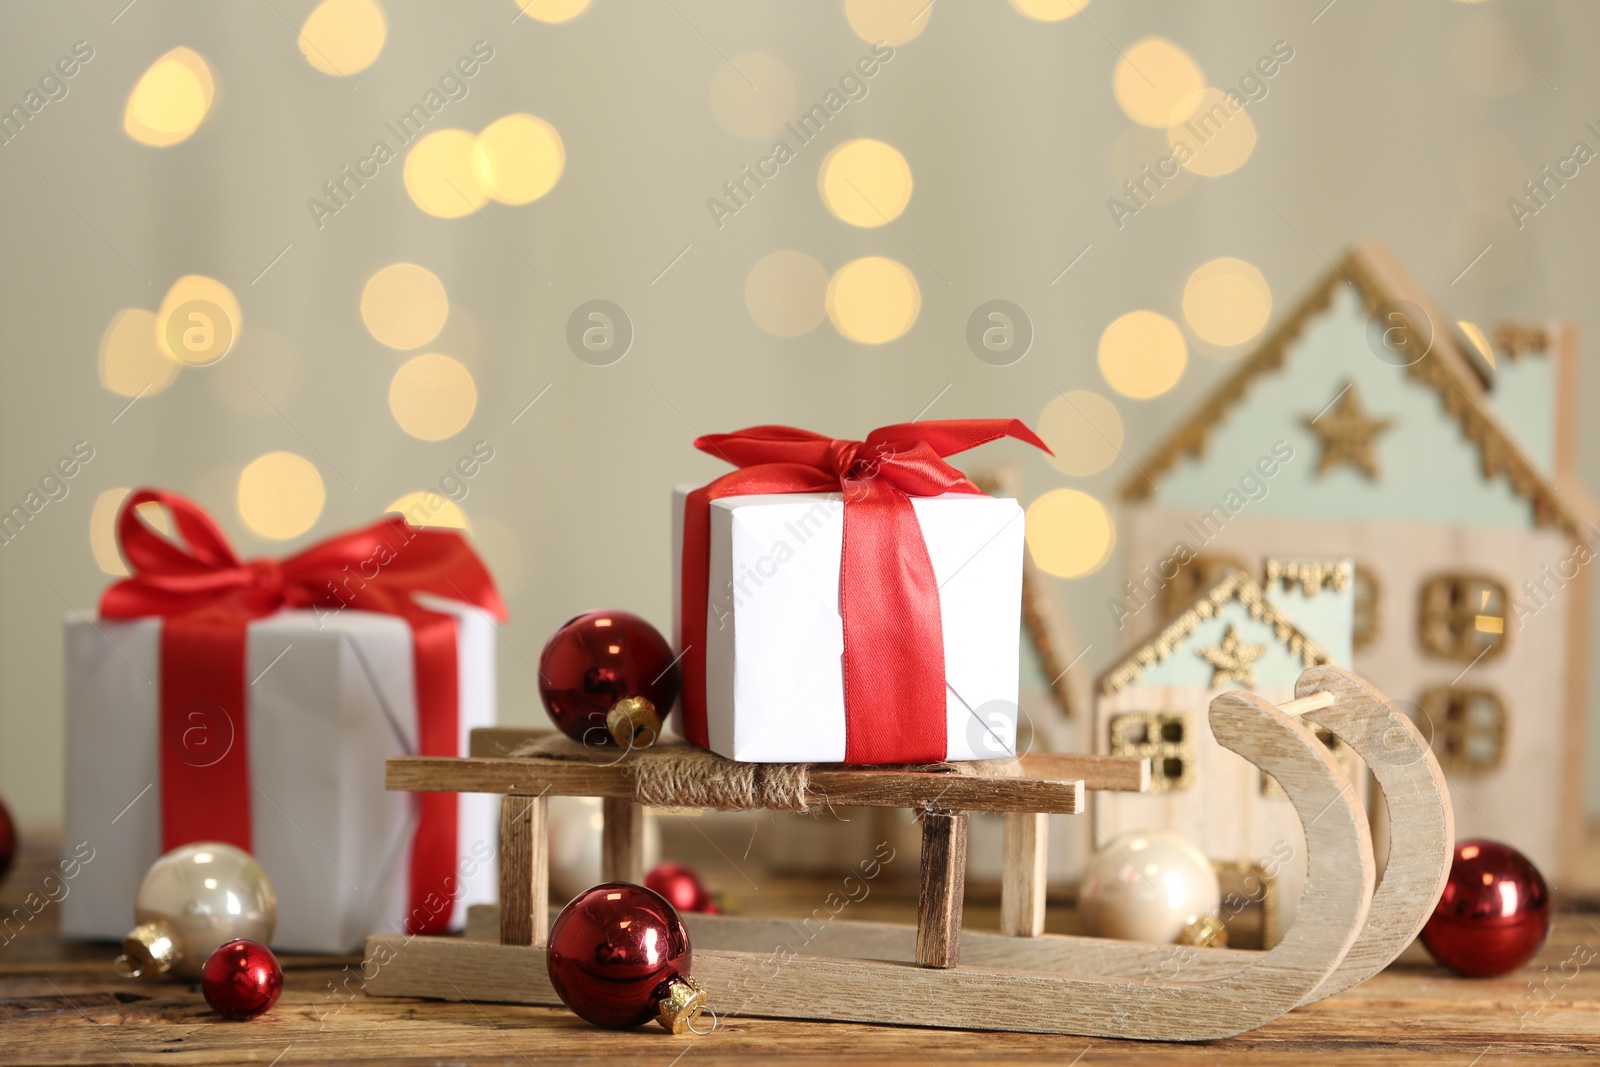 Photo of Decorative sleigh, Christmas balls and gift boxes on wooden table against blurred lights